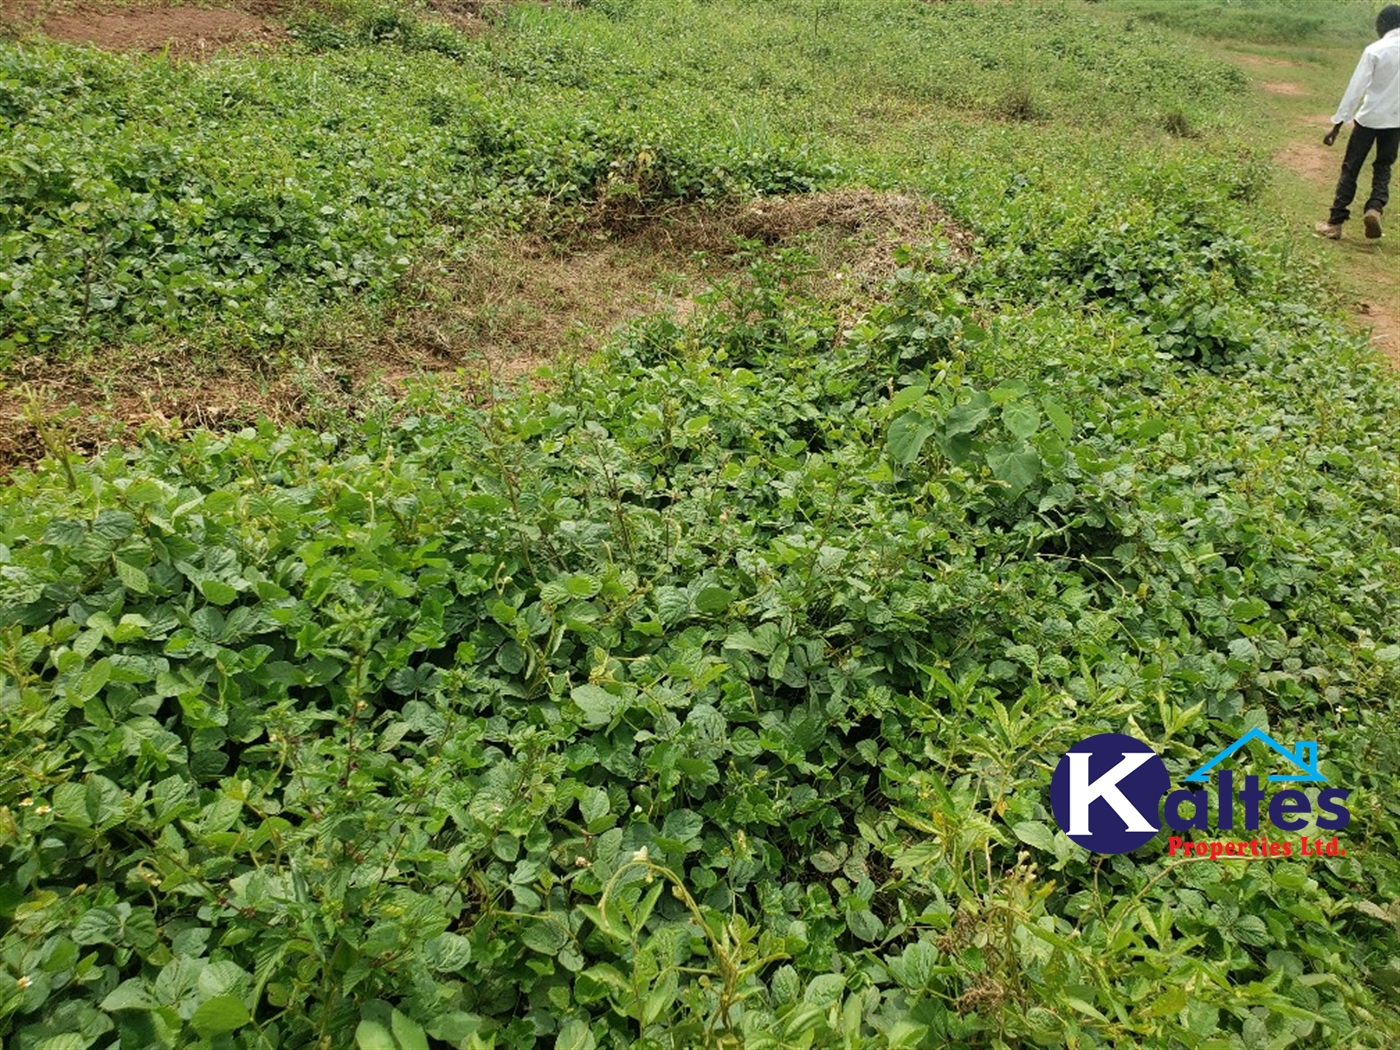 Residential Land for sale in Naggalama Mukono